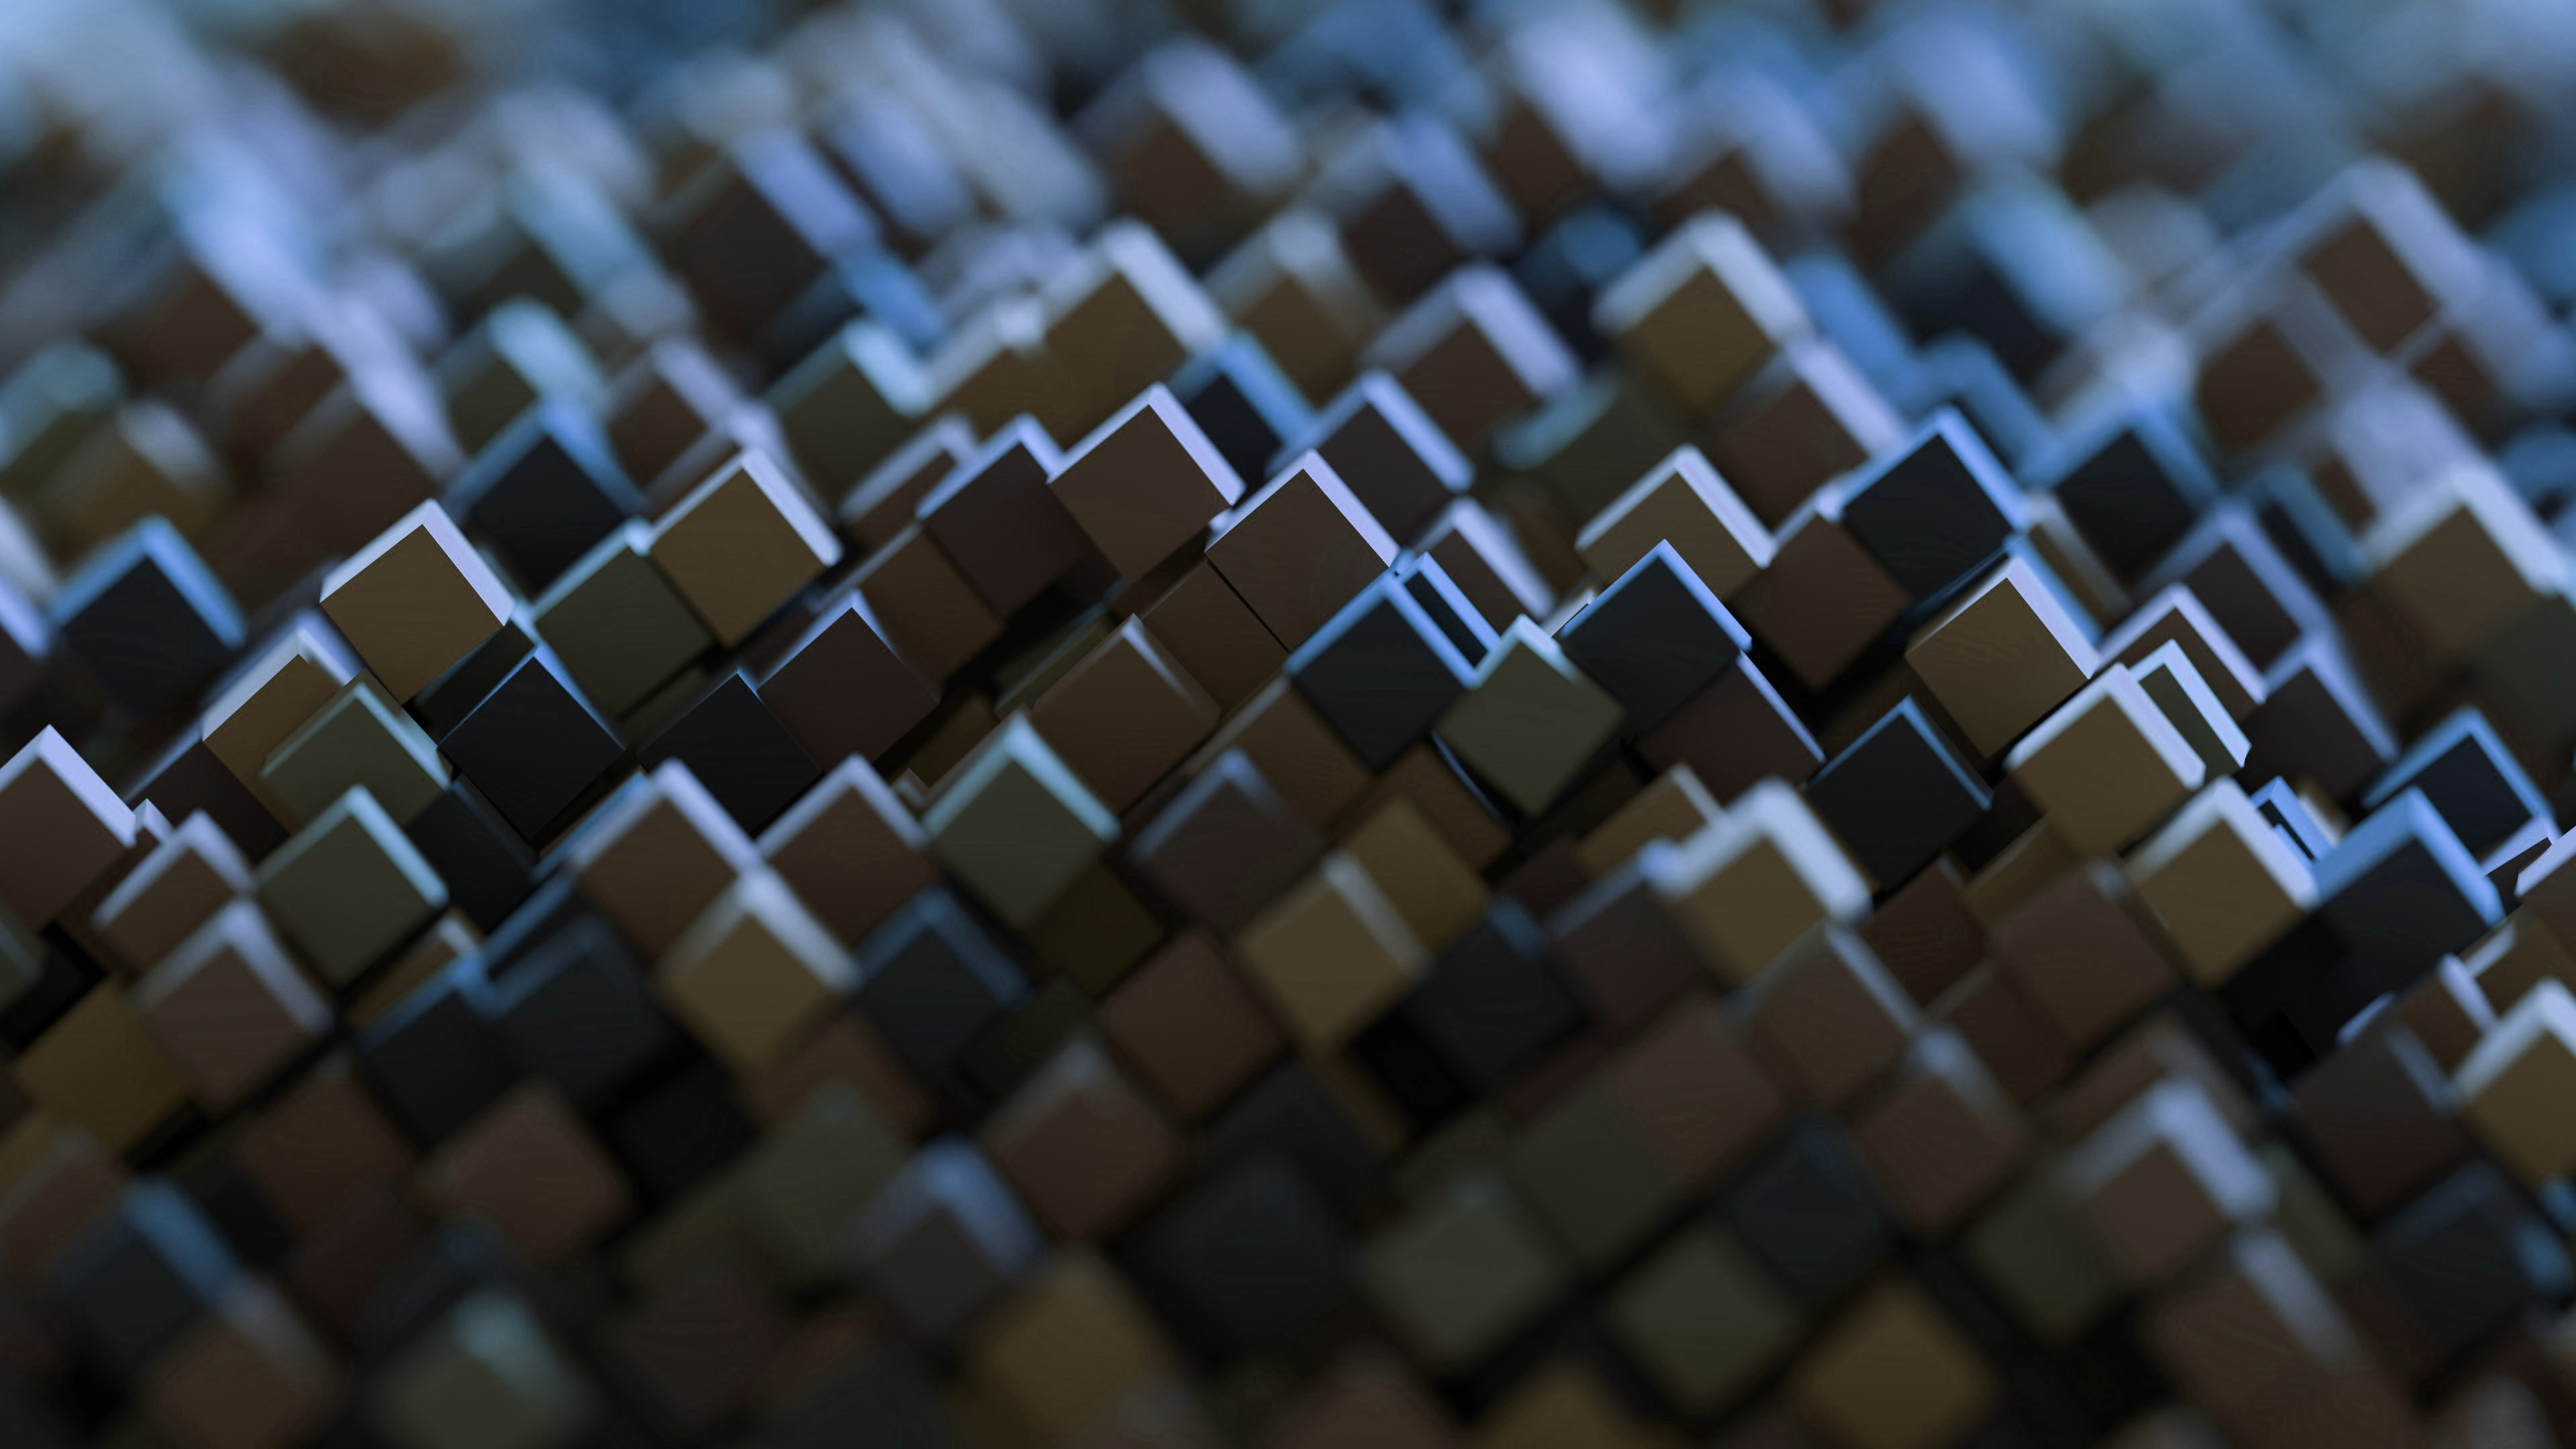 Wallpaper 3D, 4k, abstract, cubes, Abstract #13554